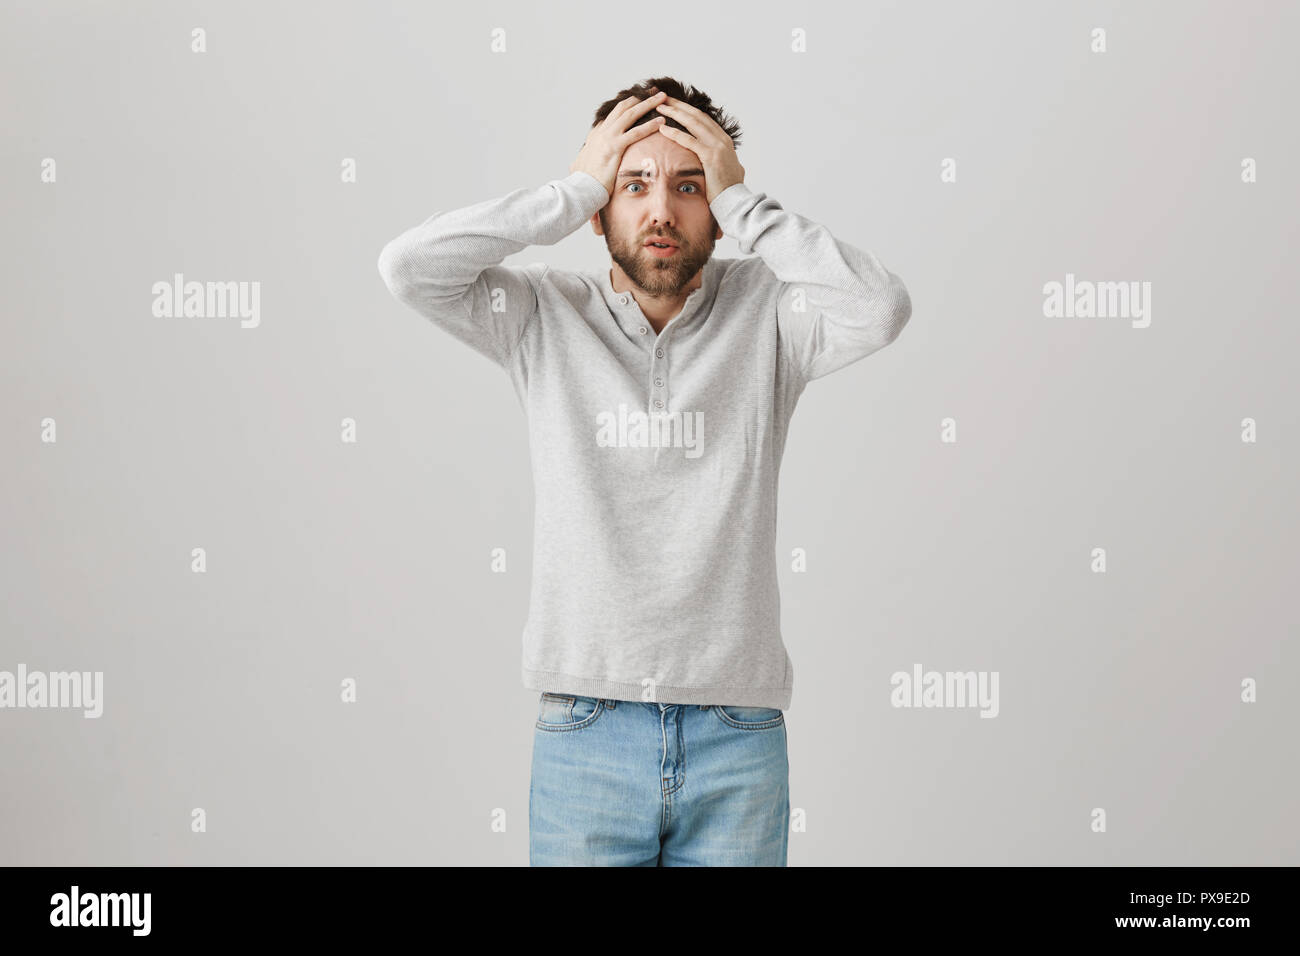 Unbelievable disaster. Worried devastated man, expressing shock and being in huge trouble, standing with hands on head and anxious expression, losing his job and wife. Life gone in wrong way Stock Photo